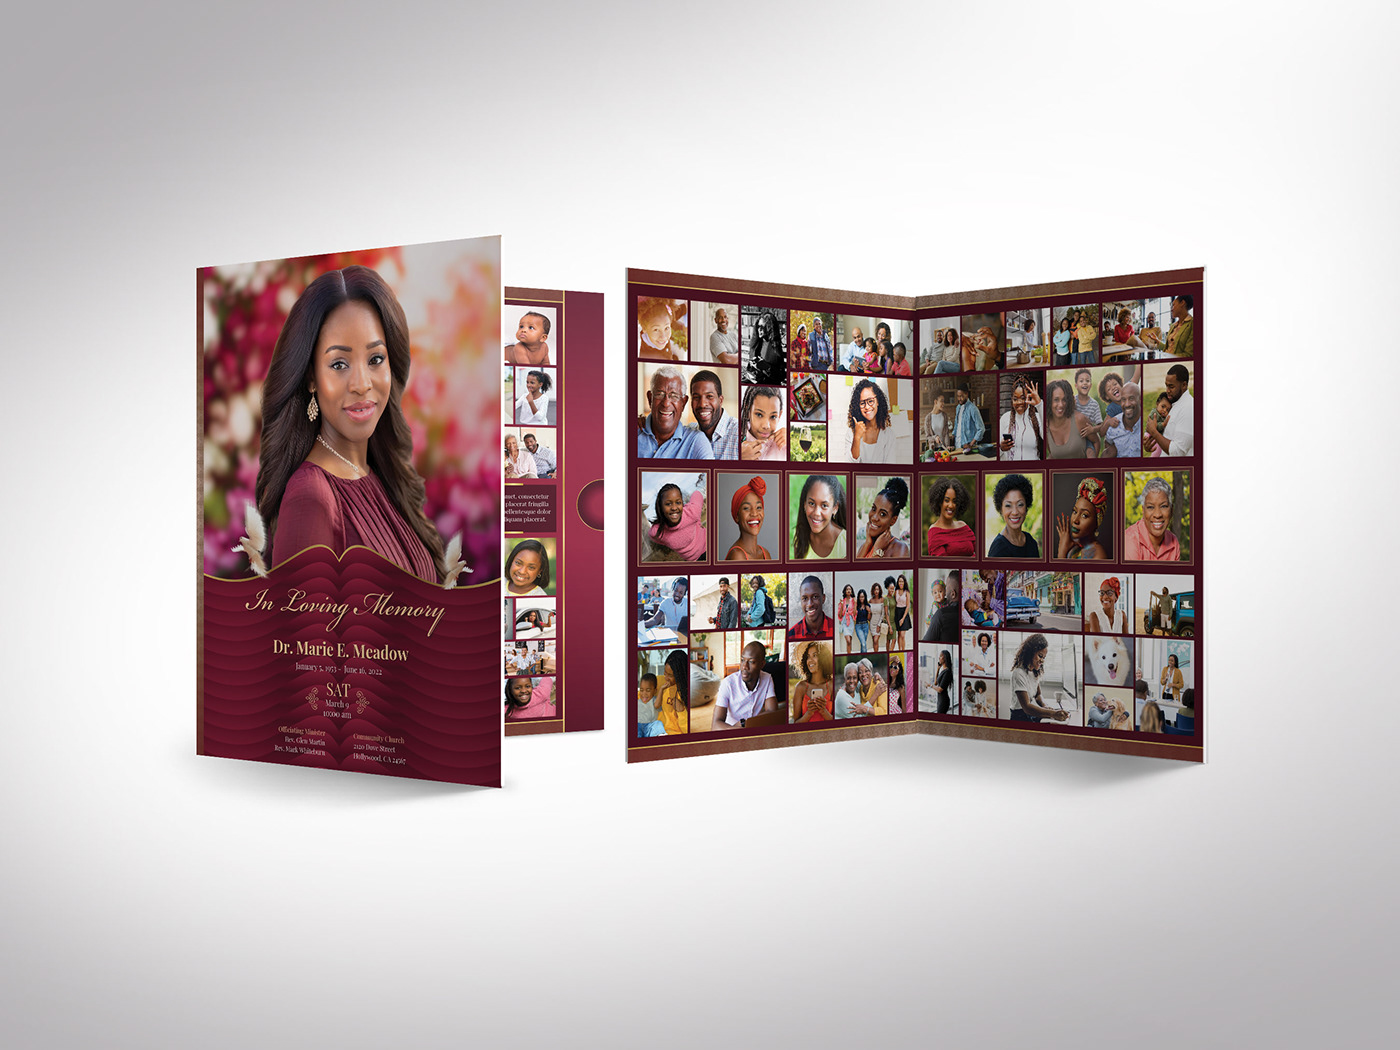 funeral program celebration of life bifold brochure In loving Memory memorial service funeral service digital download burgundy and gold for women tabloid 11x17